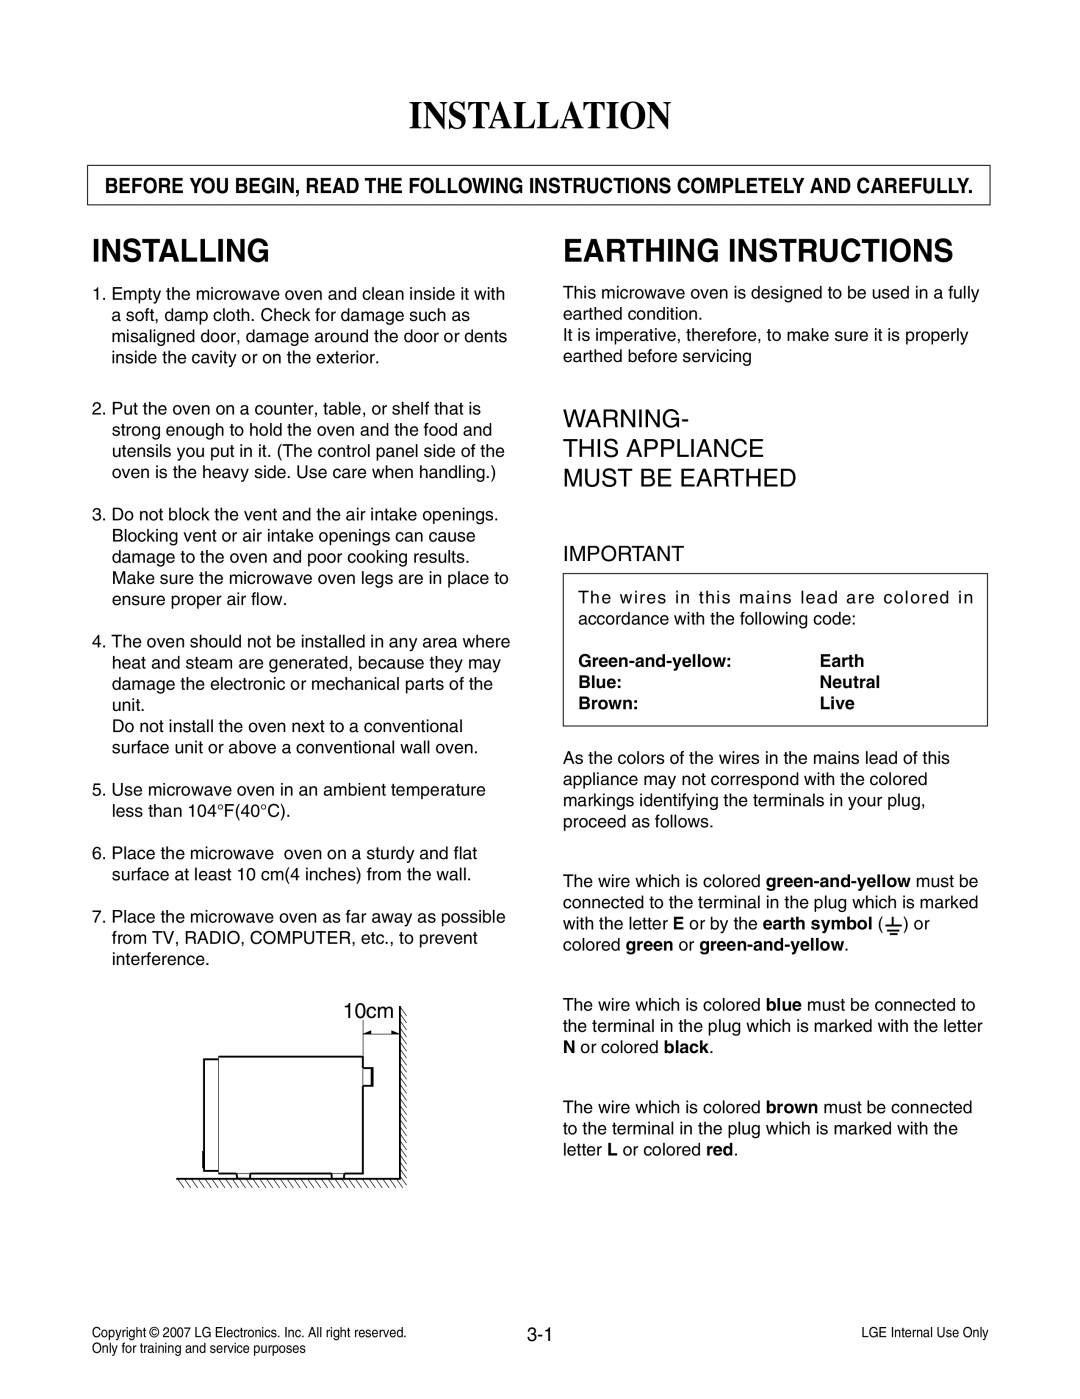 LG Electronics MS3447GRS Installation, Installing, Earthing Instructions, 10cm, Green-and-yellow, Blue, Neutral, Brown 